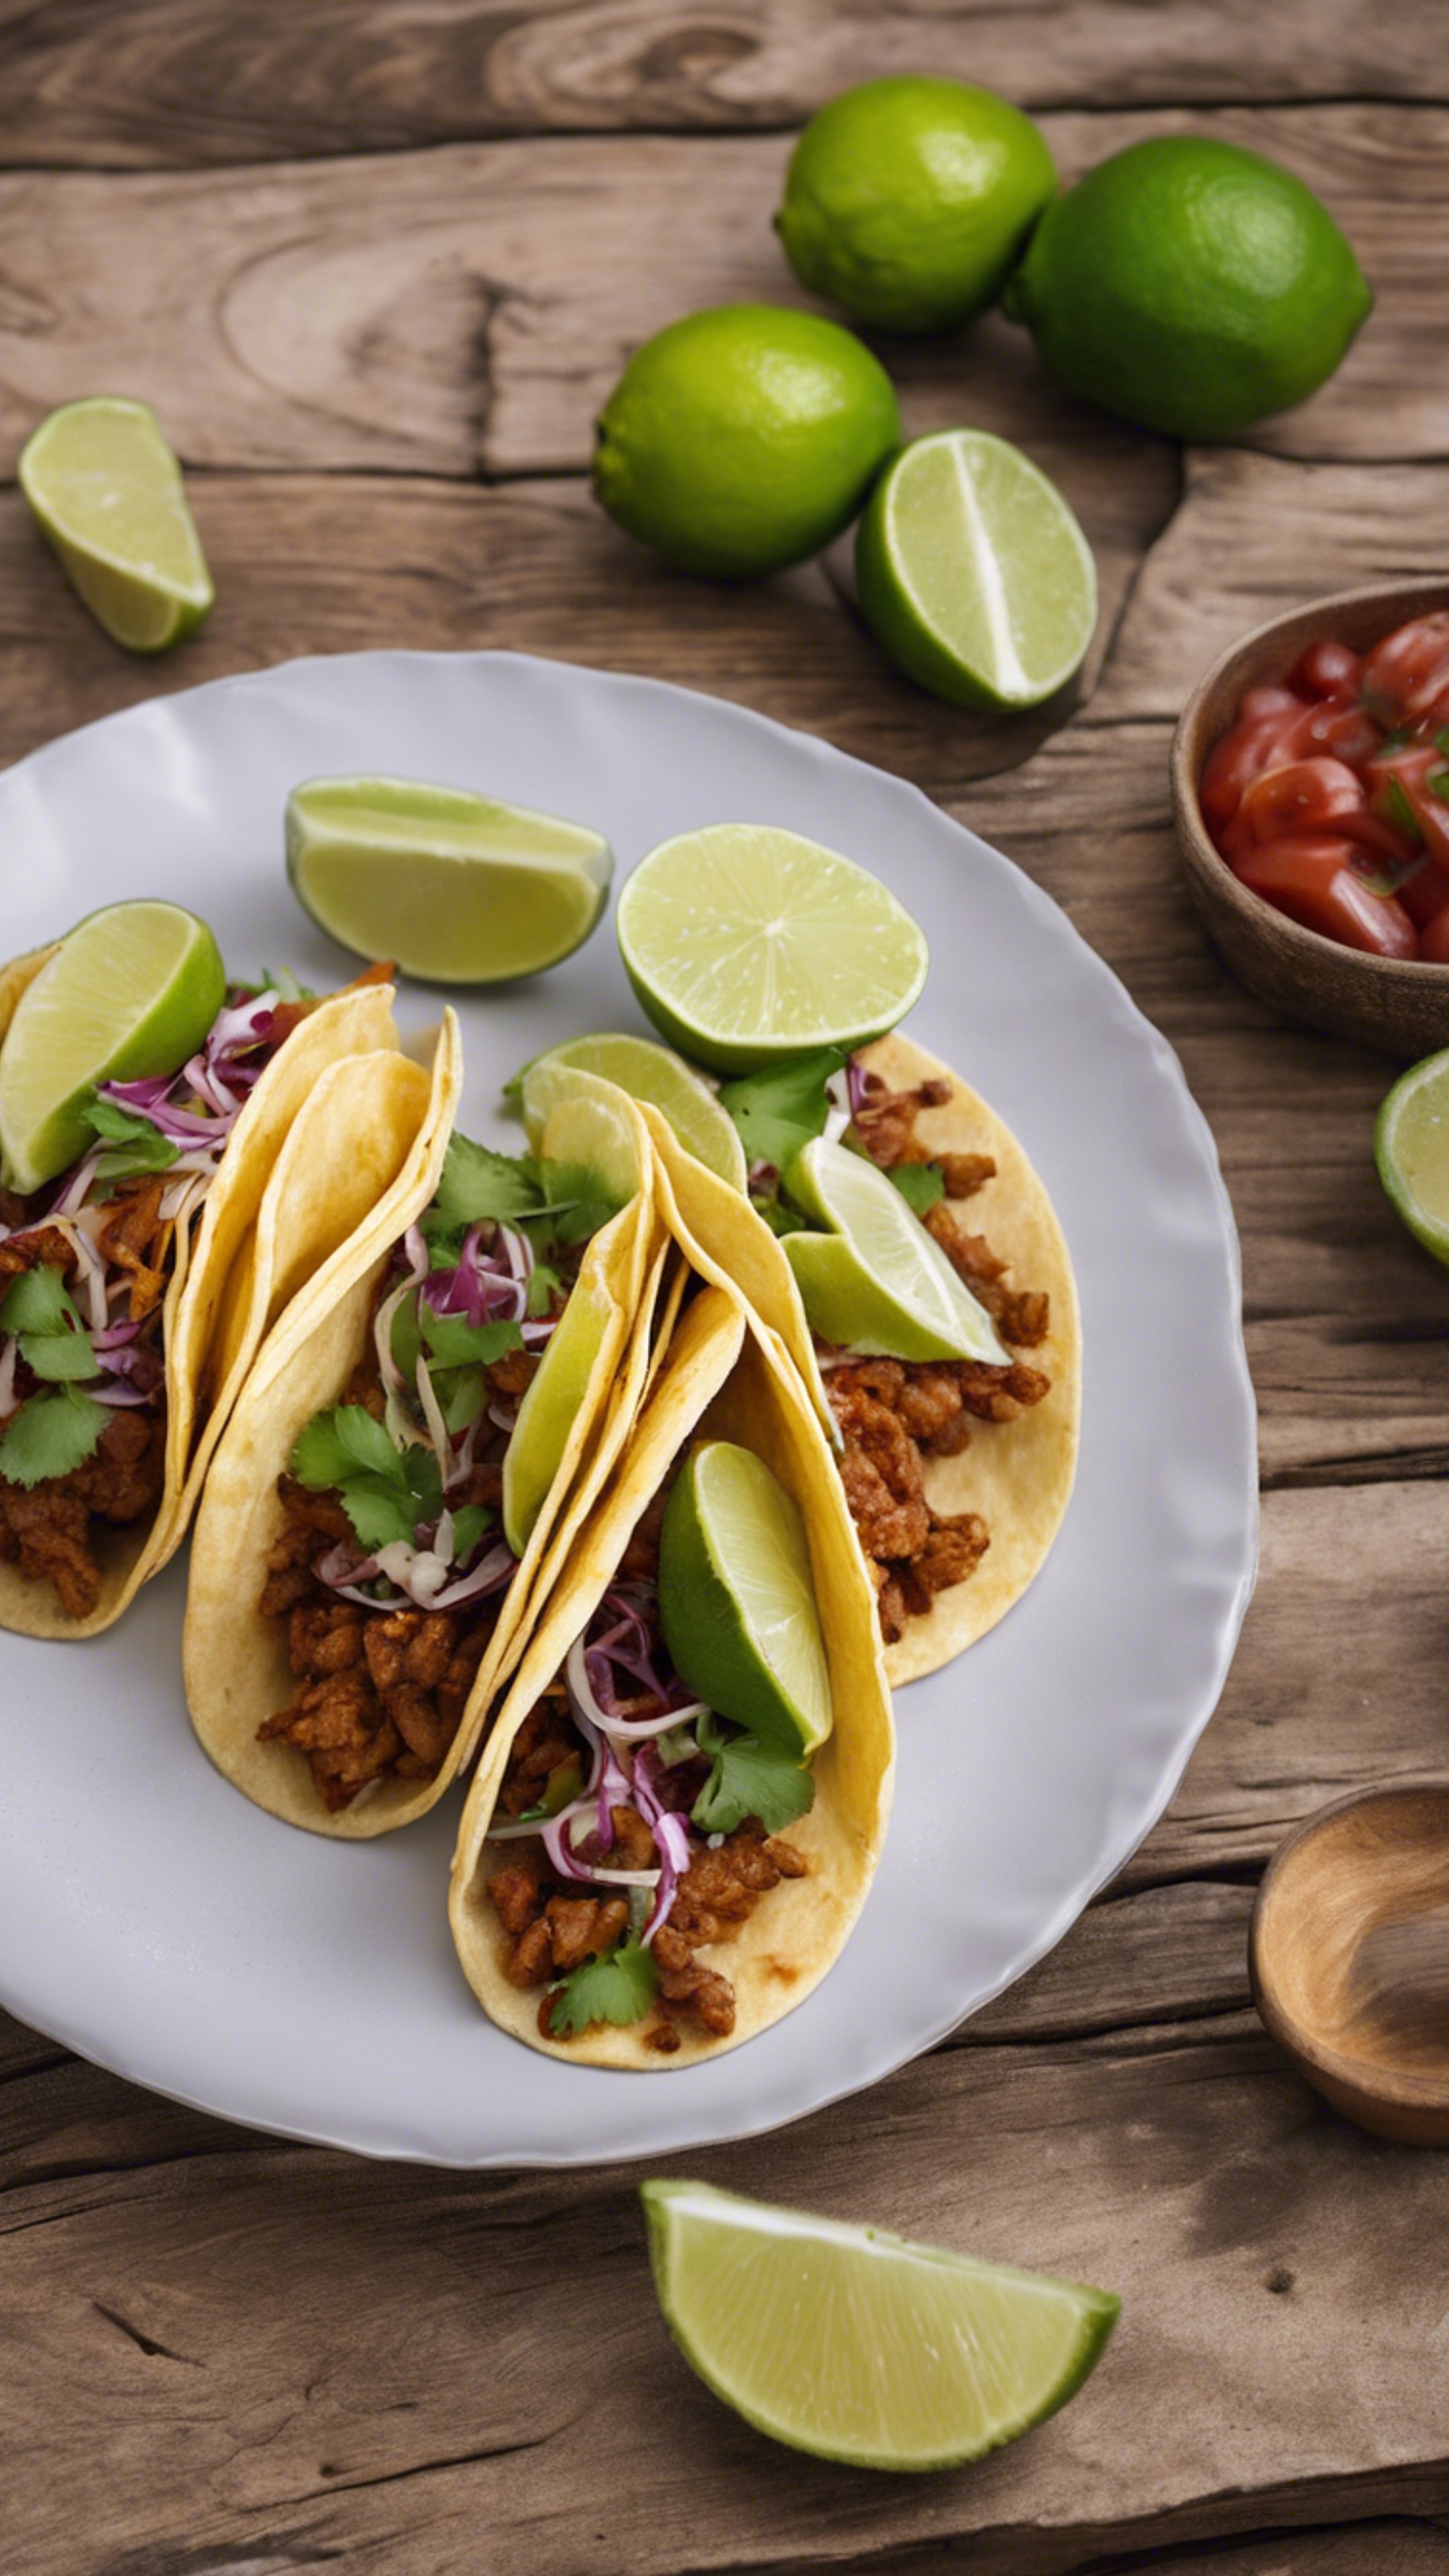 A plate of tacos garnished with fresh lime wedges on a rustic wooden table.壁紙[5f6c6b777f9c4d0caf3c]